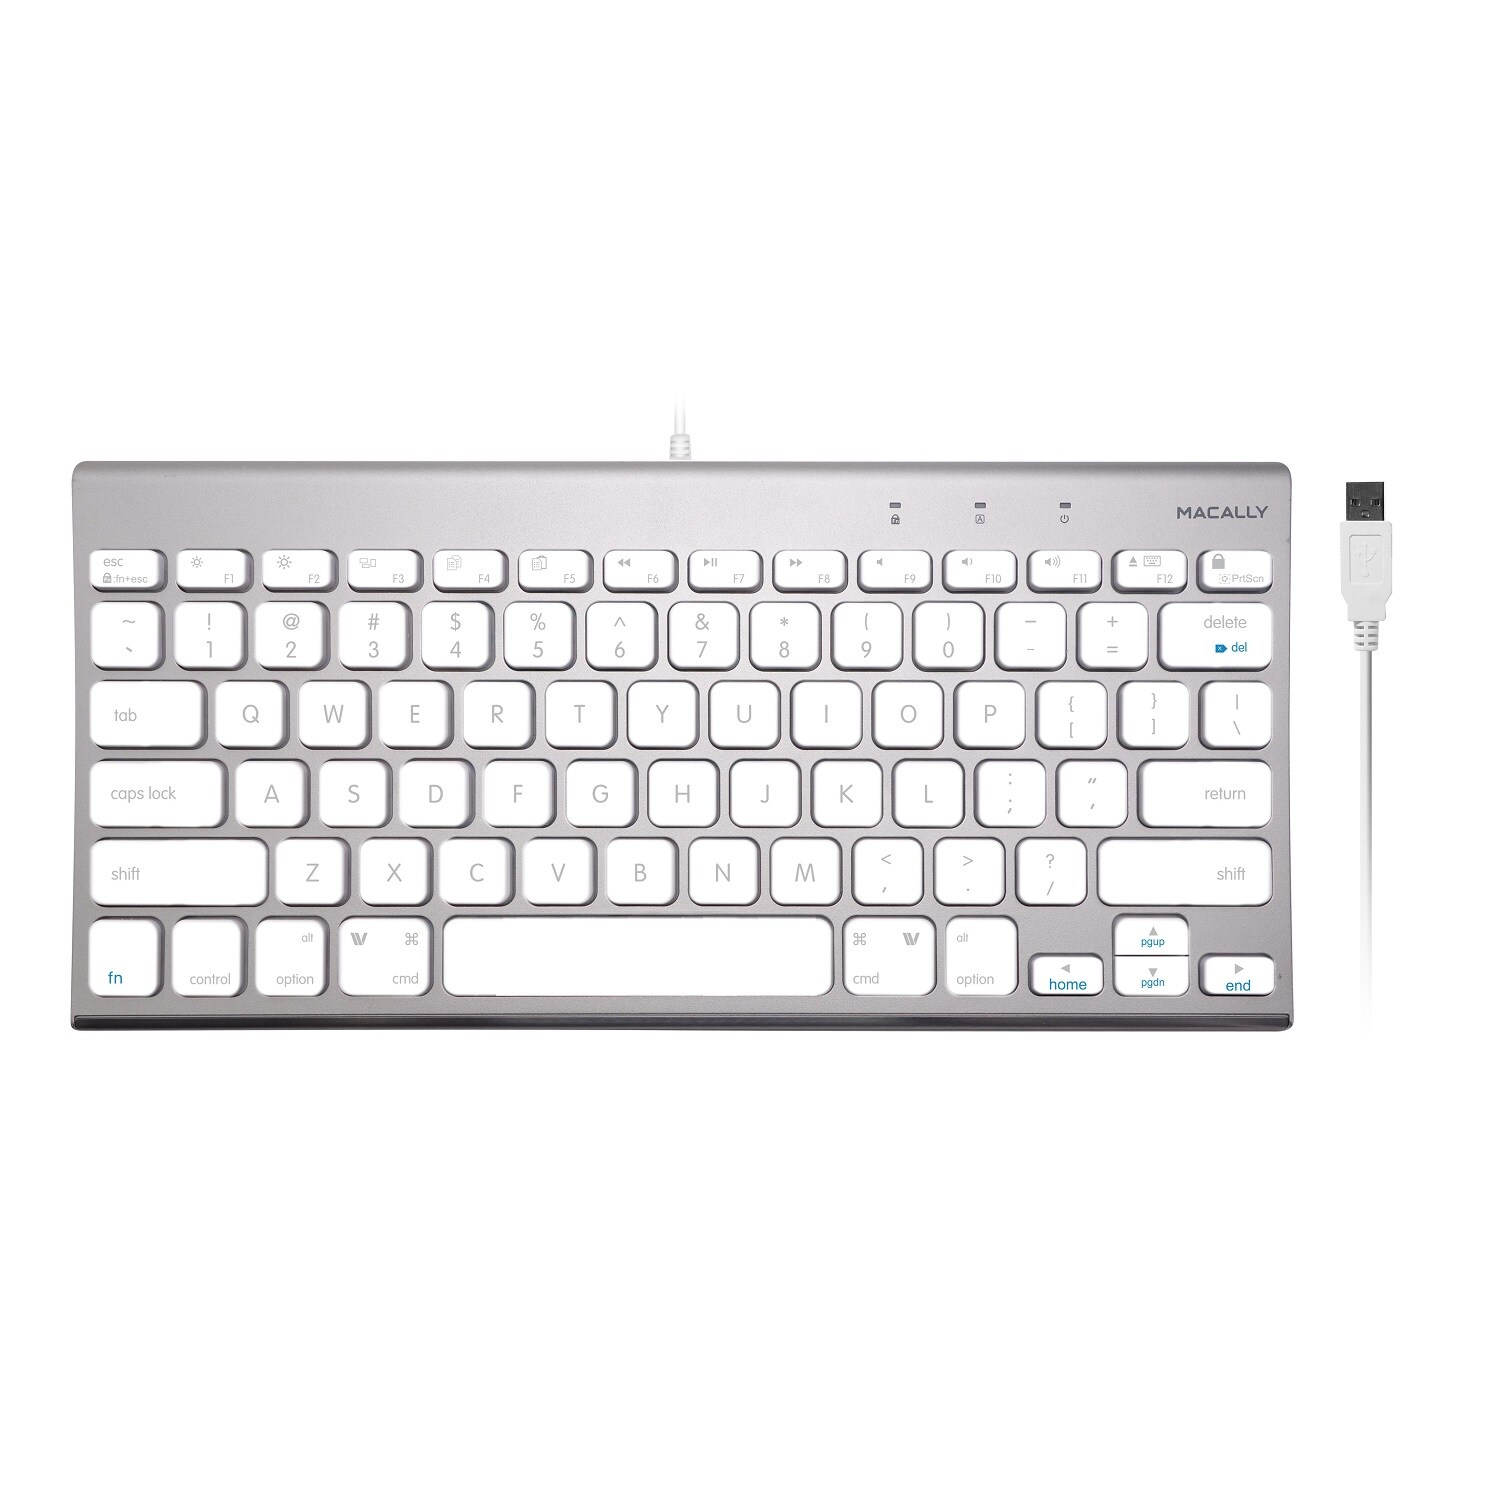 Macally Small USB Keyboard for Mac and PC - Elegant Aluminum Design with 78 Thin Keys, 13 Shortcuts, and LED - Space Mini Keyboard - Easy to Use and